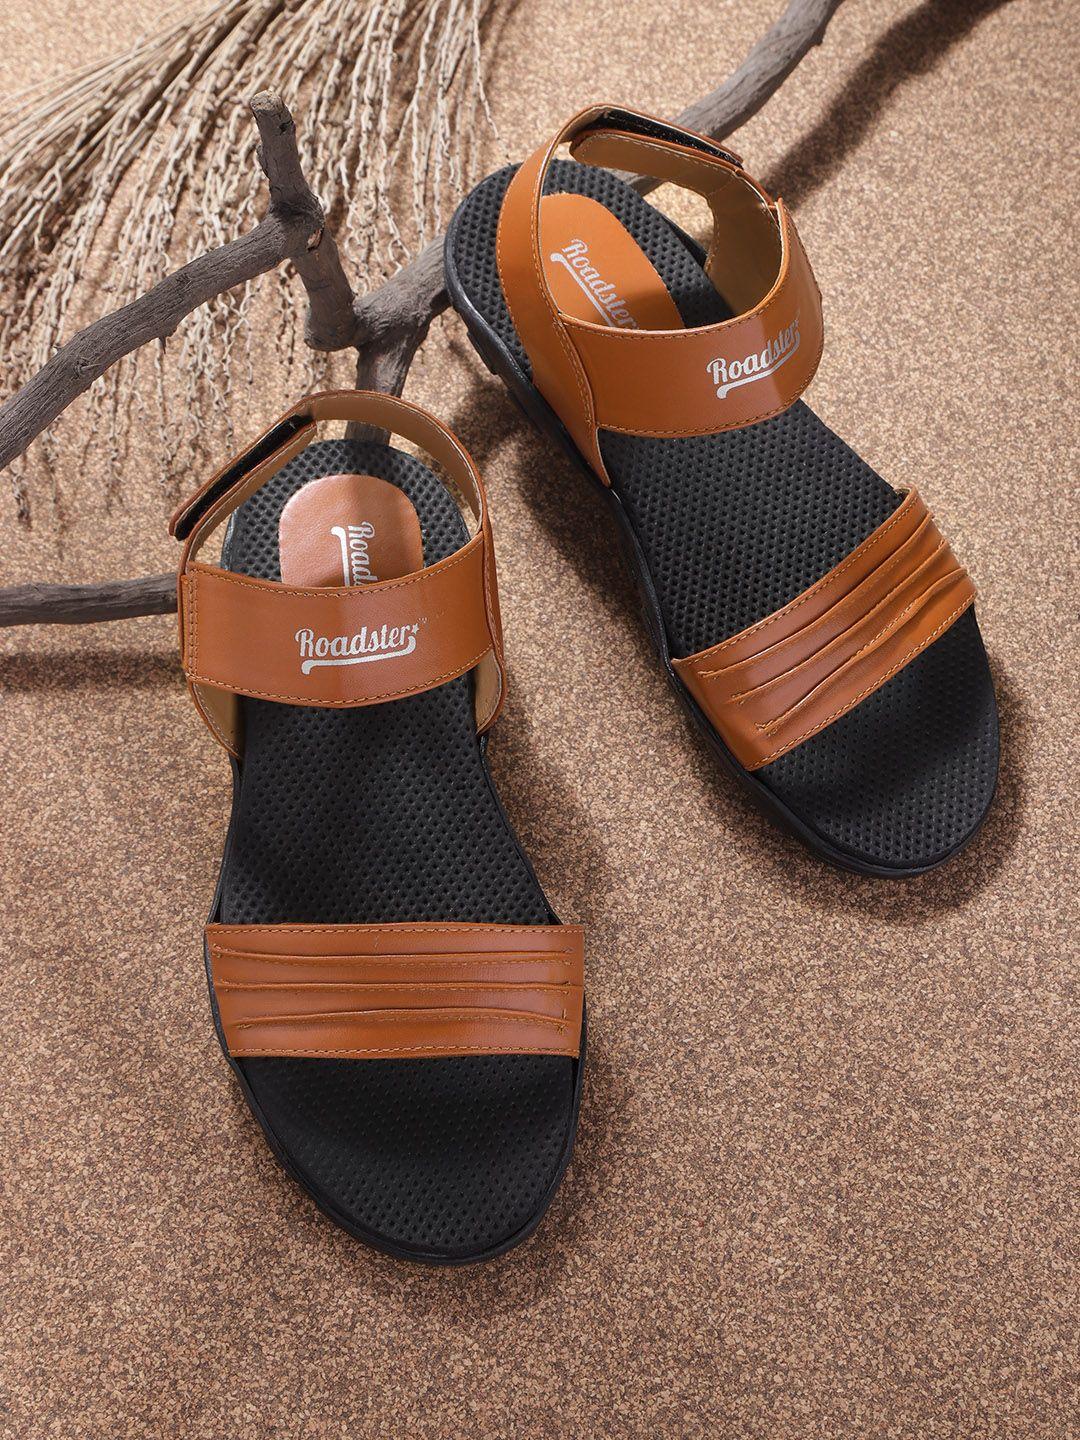 the-roadster-lifestyle-co-women-tan-brown-striped-sports-sandals